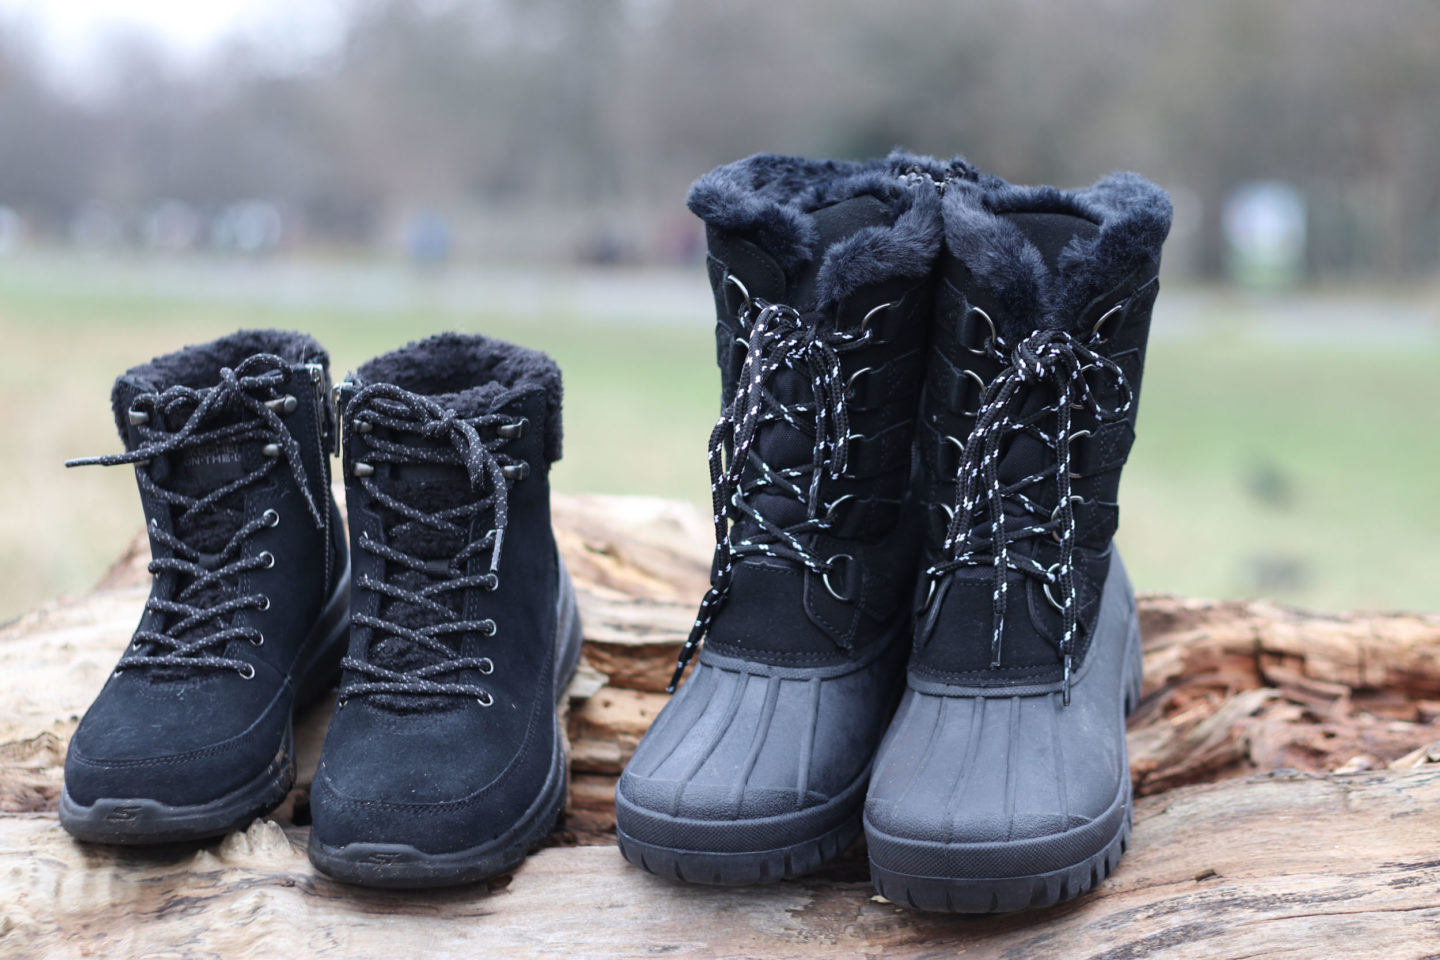 How to keep your feet warm in cosy winter boots